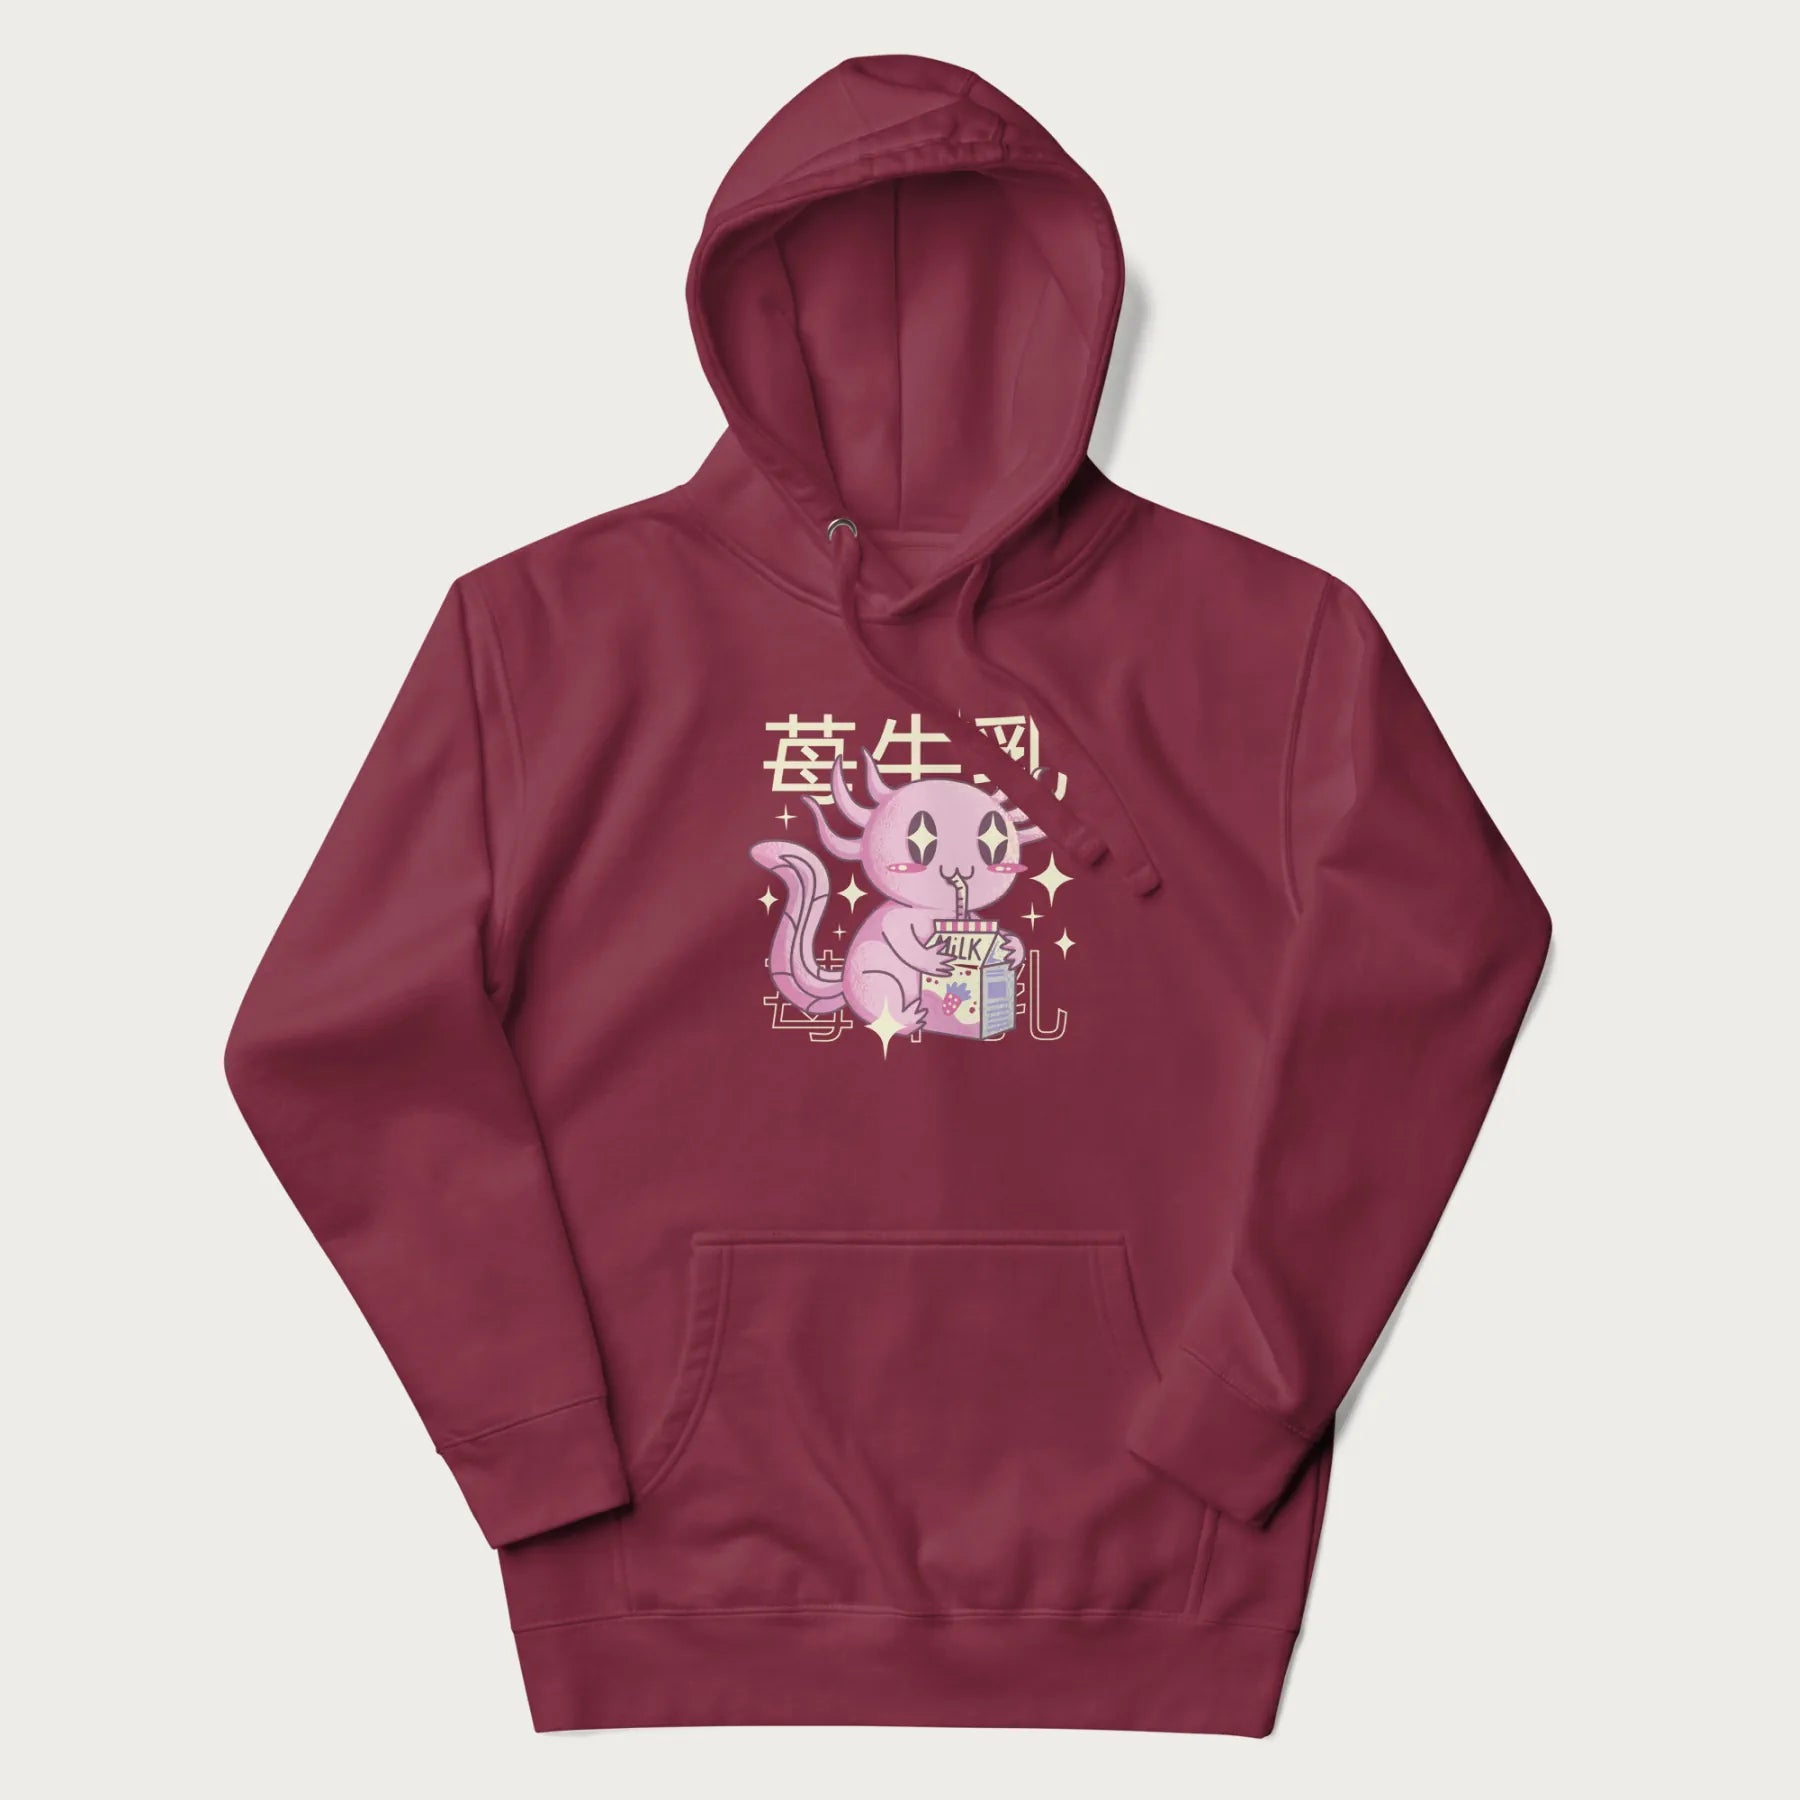 Maroon hoodie with Japanese graphic of a cute pink axolotl sipping strawberry milk from a carton, with Japanese text '苺牛乳' (Strawberry Milk).